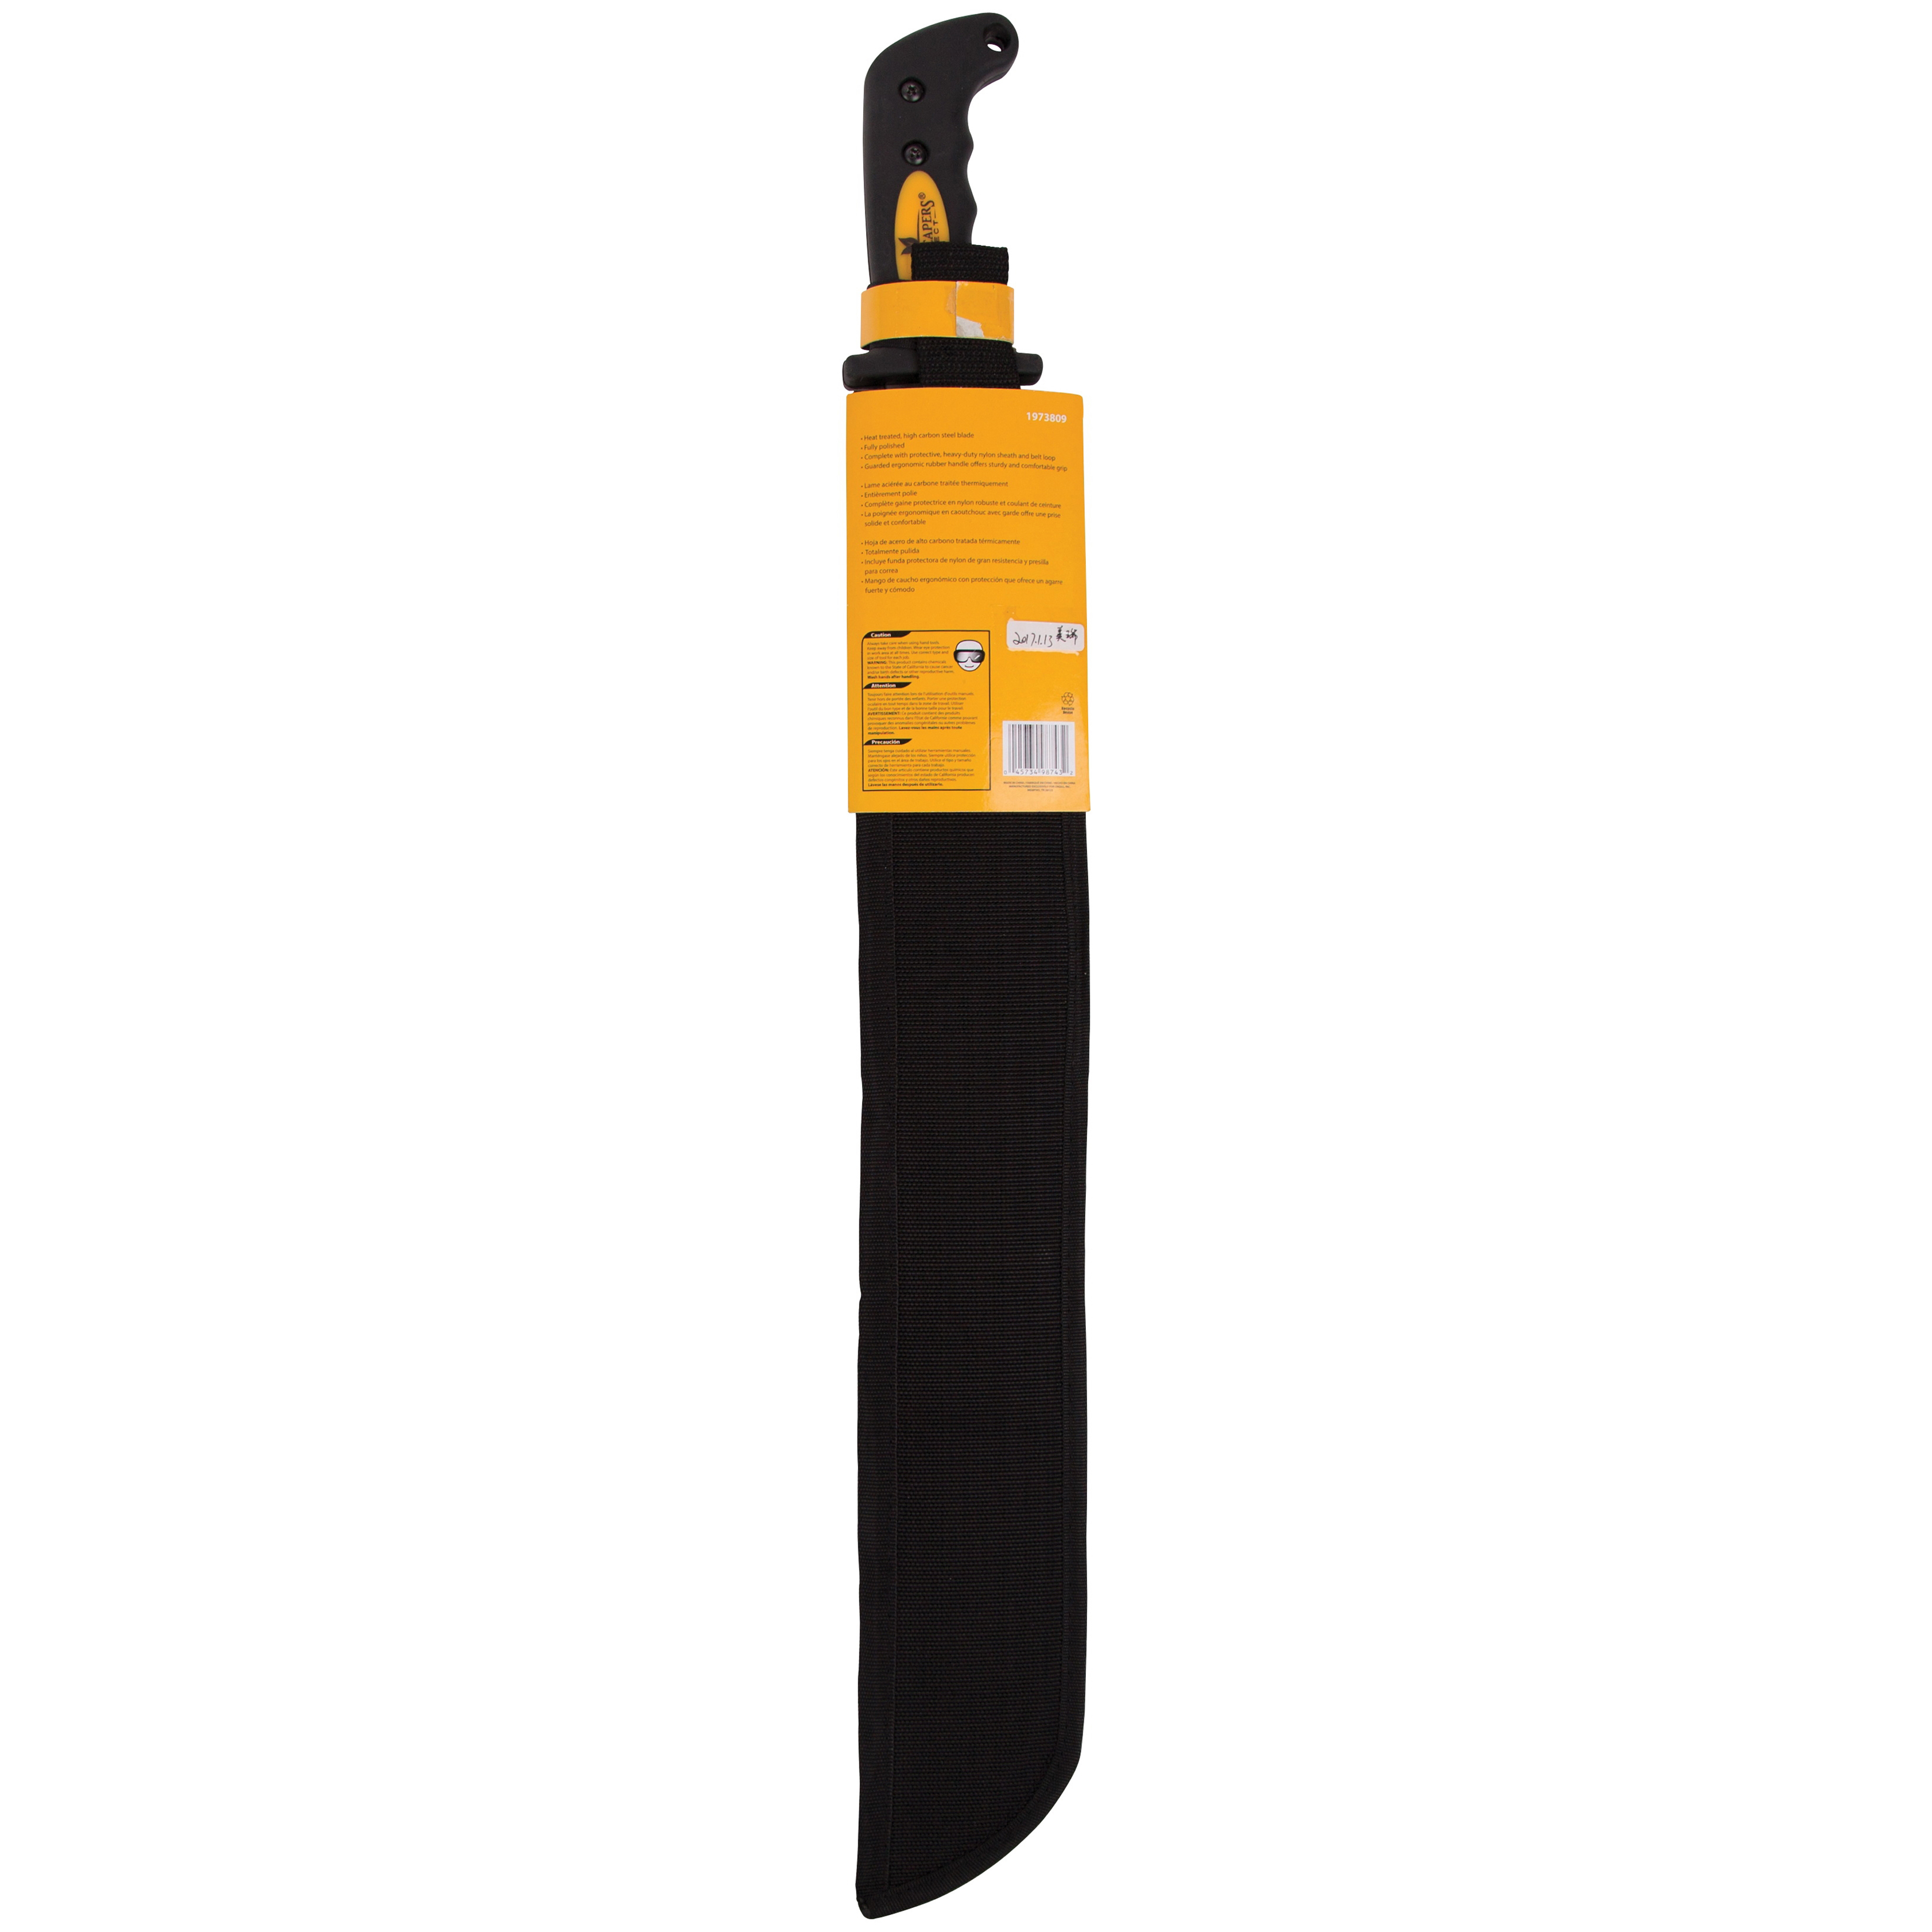 Landscapers Select JLO-003-N3L 22 in Blade, 27-1/2 in OAL, 22 in Blade, High Carbon Steel Blade, Rubber Handle - 3